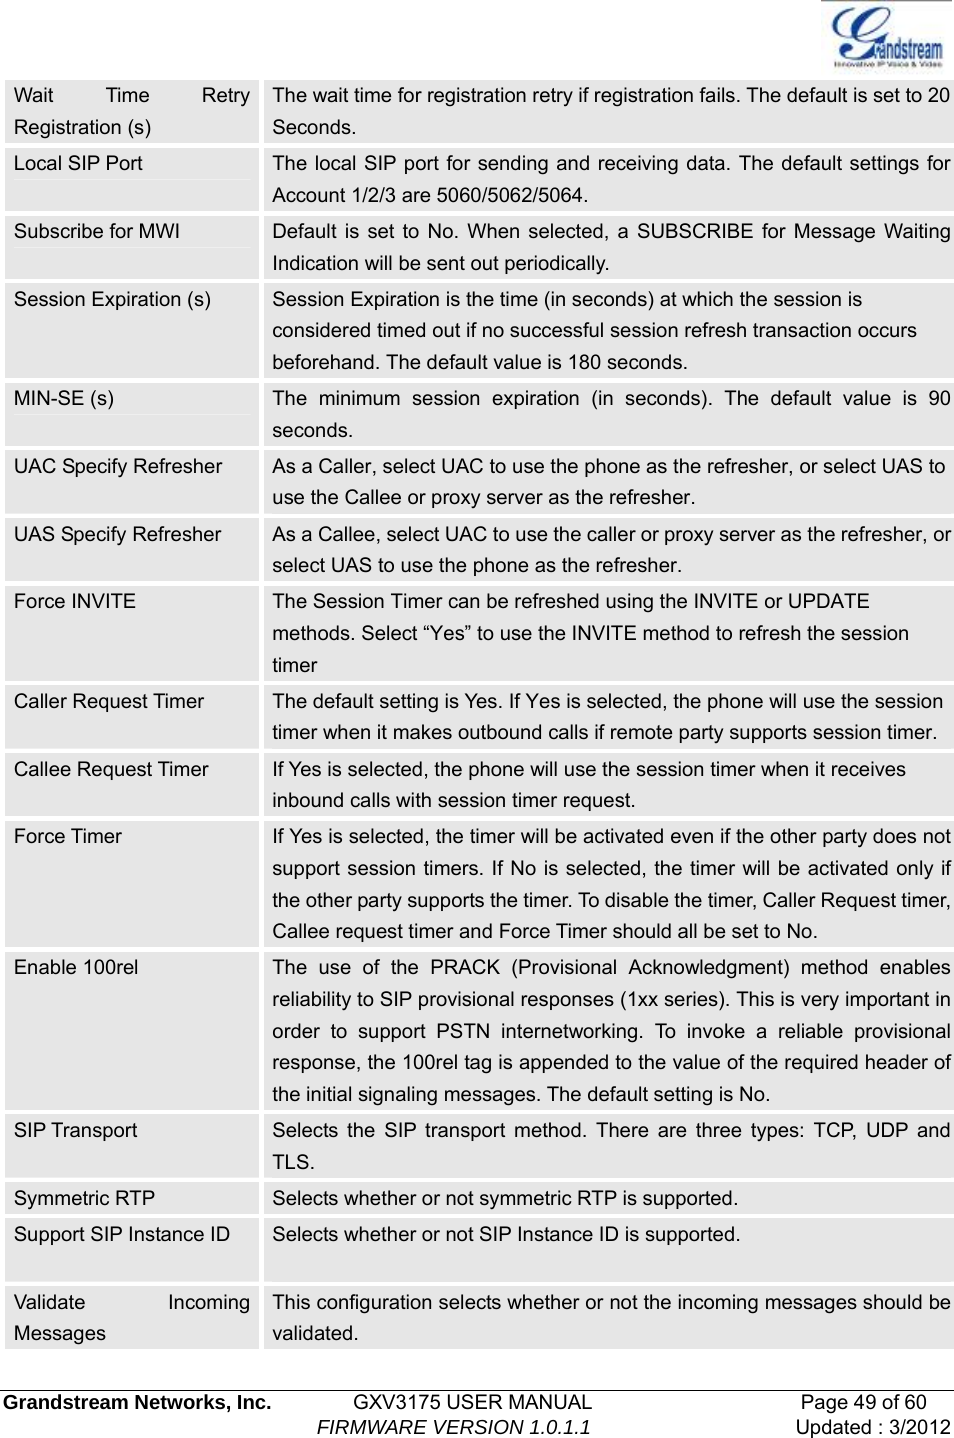   Grandstream Networks, Inc.        GXV3175 USER MANUAL                     Page 49 of 60                                FIRMWARE VERSION 1.0.1.1 Updated : 3/2012  Wait Time Retry Registration (s) The wait time for registration retry if registration fails. The default is set to 20 Seconds. Local SIP Port  The local SIP port for sending and receiving data. The default settings for Account 1/2/3 are 5060/5062/5064. Subscribe for MWI  Default is set to No. When selected, a SUBSCRIBE for Message Waiting Indication will be sent out periodically. Session Expiration (s)  Session Expiration is the time (in seconds) at which the session is considered timed out if no successful session refresh transaction occurs beforehand. The default value is 180 seconds. MIN-SE (s)  The minimum session expiration (in seconds). The default value is 90 seconds. UAC Specify Refresher  As a Caller, select UAC to use the phone as the refresher, or select UAS to use the Callee or proxy server as the refresher. UAS Specify Refresher  As a Callee, select UAC to use the caller or proxy server as the refresher, or select UAS to use the phone as the refresher. Force INVITE  The Session Timer can be refreshed using the INVITE or UPDATE methods. Select “Yes” to use the INVITE method to refresh the session timer Caller Request Timer  The default setting is Yes. If Yes is selected, the phone will use the session timer when it makes outbound calls if remote party supports session timer. Callee Request Timer  If Yes is selected, the phone will use the session timer when it receives inbound calls with session timer request. Force Timer  If Yes is selected, the timer will be activated even if the other party does not support session timers. If No is selected, the timer will be activated only if the other party supports the timer. To disable the timer, Caller Request timer, Callee request timer and Force Timer should all be set to No.   Enable 100rel    The use of the PRACK (Provisional Acknowledgment) method enables reliability to SIP provisional responses (1xx series). This is very important in order to support PSTN internetworking. To invoke a reliable provisional response, the 100rel tag is appended to the value of the required header of the initial signaling messages. The default setting is No.   SIP Transport  Selects the SIP transport method. There are three types: TCP, UDP and TLS. Symmetric RTP  Selects whether or not symmetric RTP is supported.   Support SIP Instance ID  Selects whether or not SIP Instance ID is supported.    Validate Incoming Messages This configuration selects whether or not the incoming messages should be validated. 